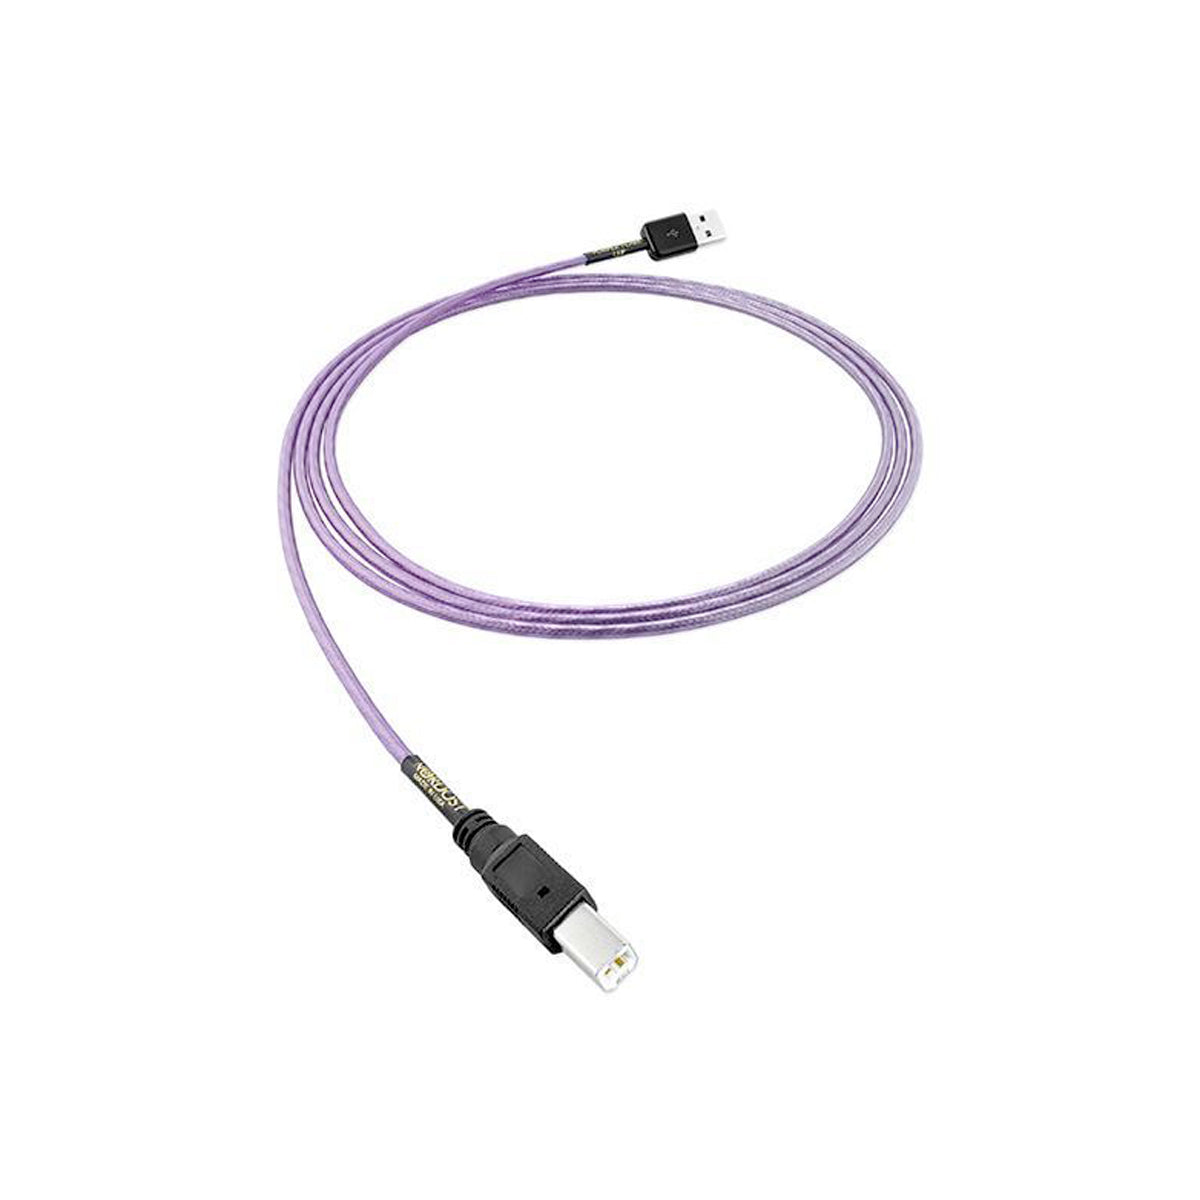 Nordost Purple Flare USB Cable - The Audio Experts